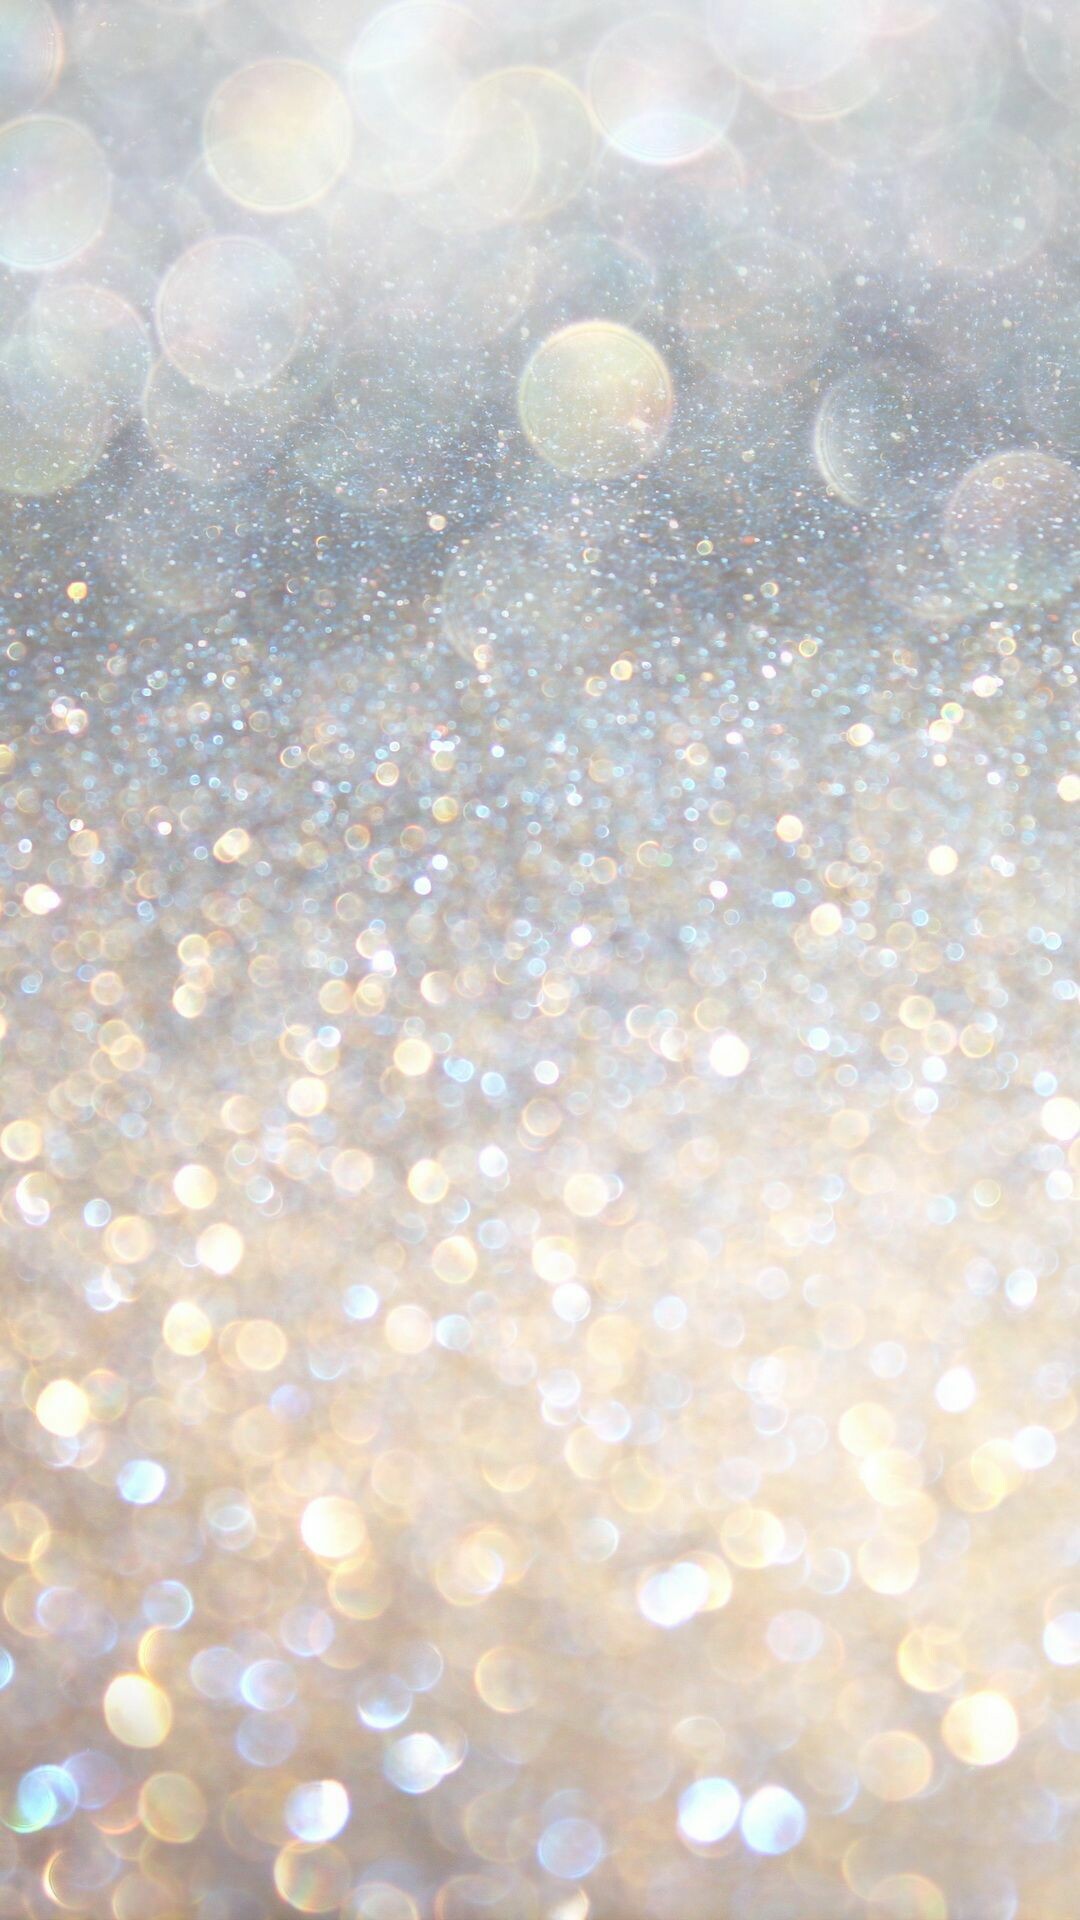 Glitter iPhone 6 Plus Wallpaper: HD, 4K, 5K for PC and Mobile. Download free image for iPhone, Android